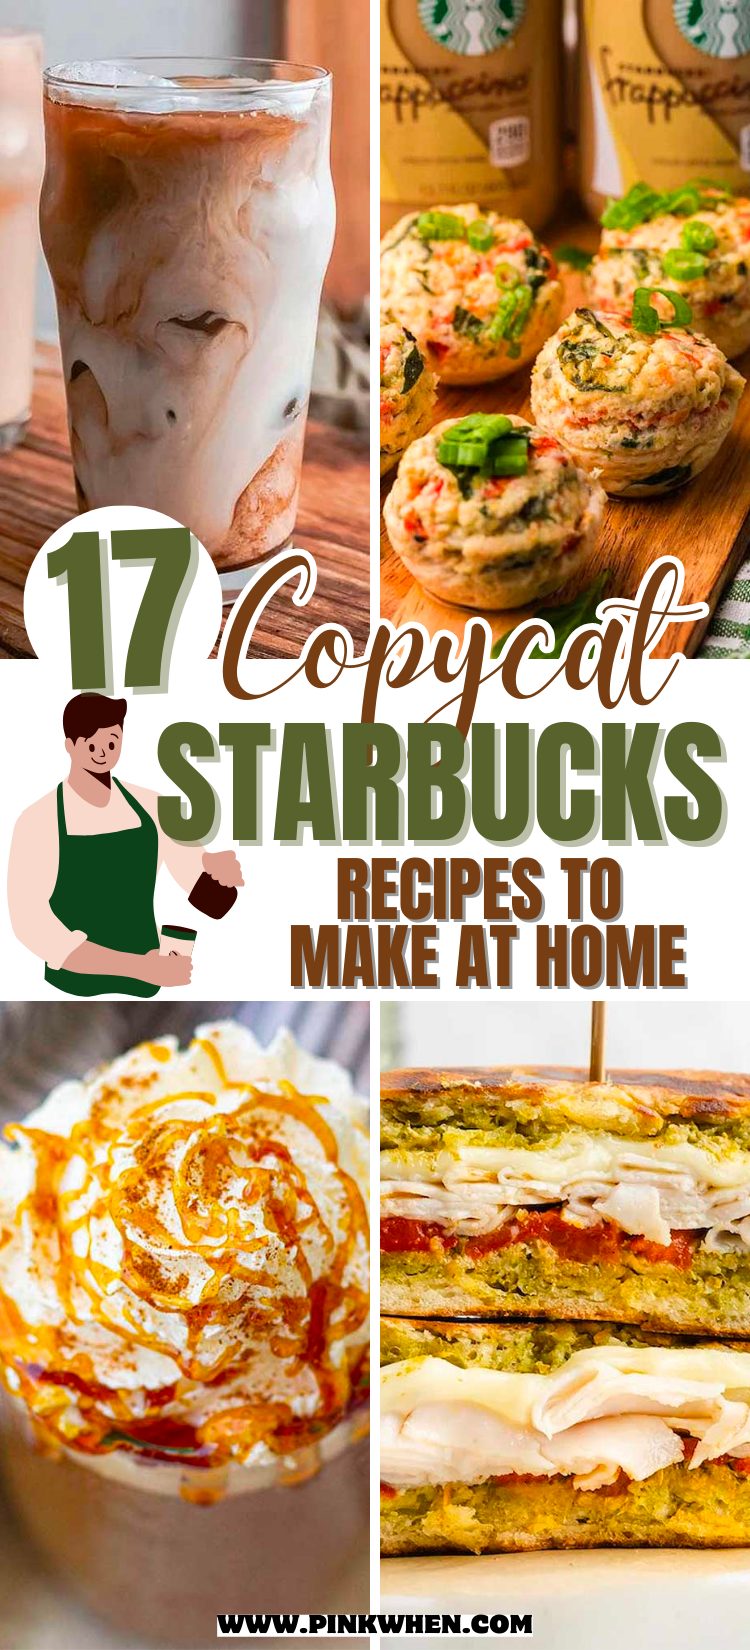 Enjoy the convenience of making 17 copycat Starbucks recipes in the comfort of your own home.